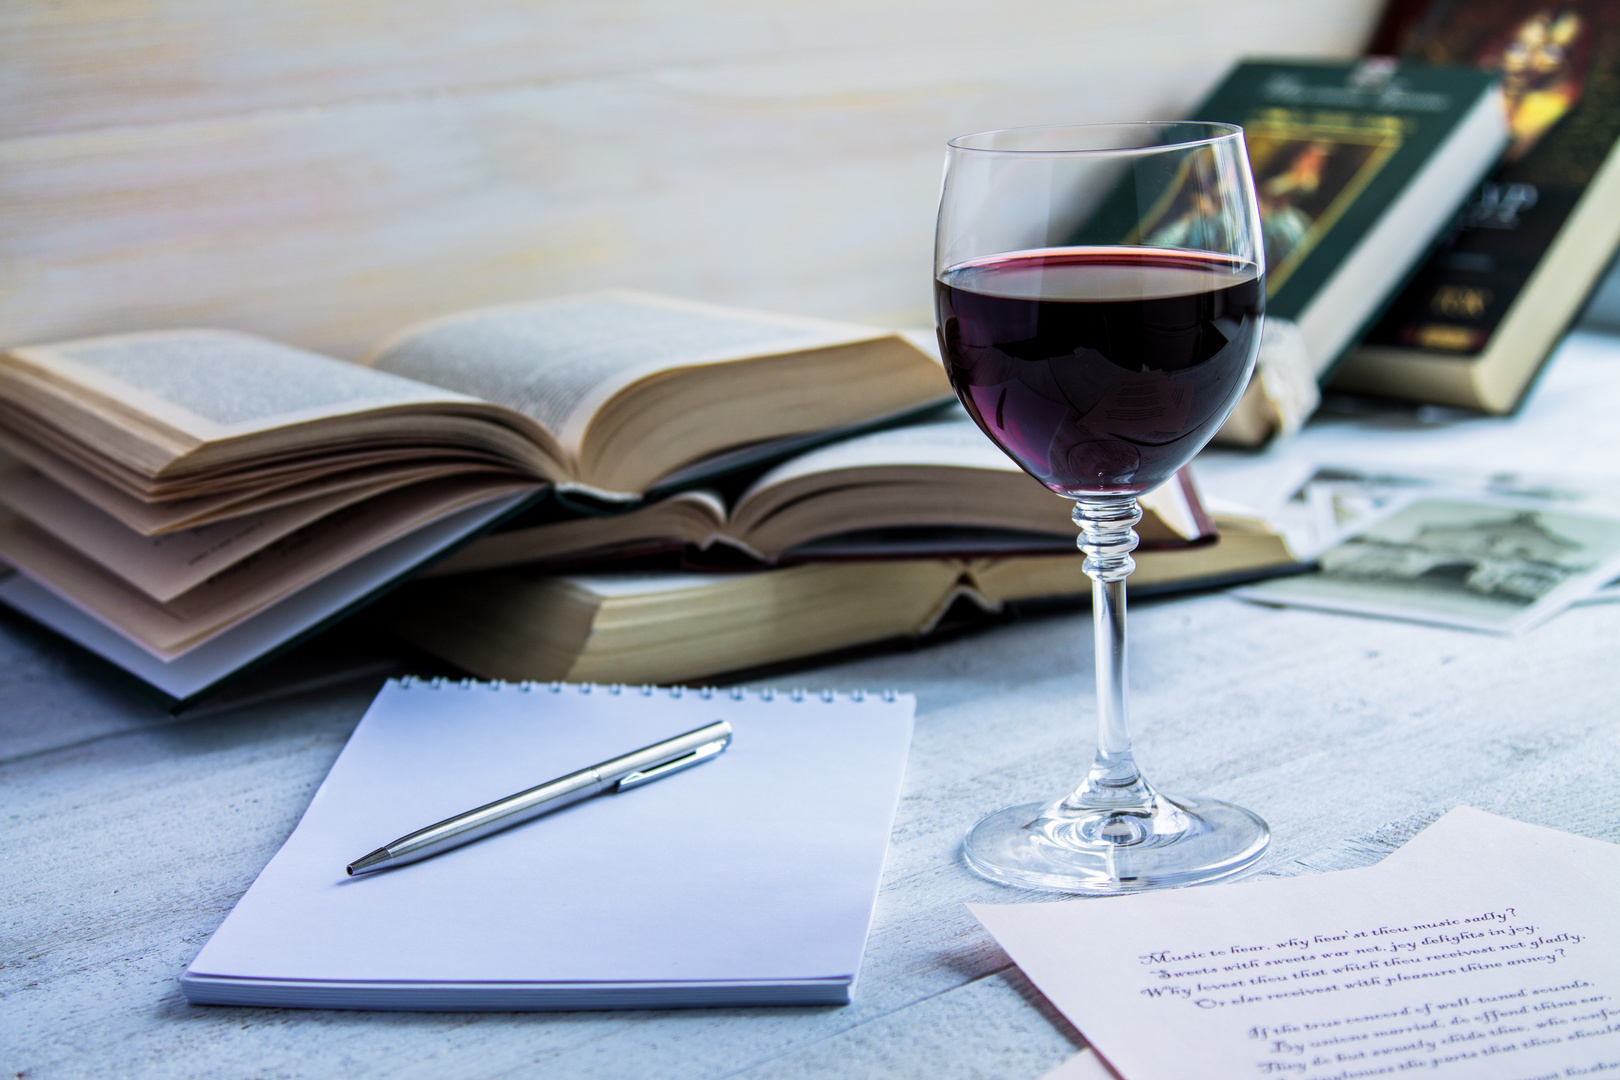 Authors Uncorked: A Wine Tasting Inspired by Famous Writers [October 16], Cambridge, Massachusetts, United States